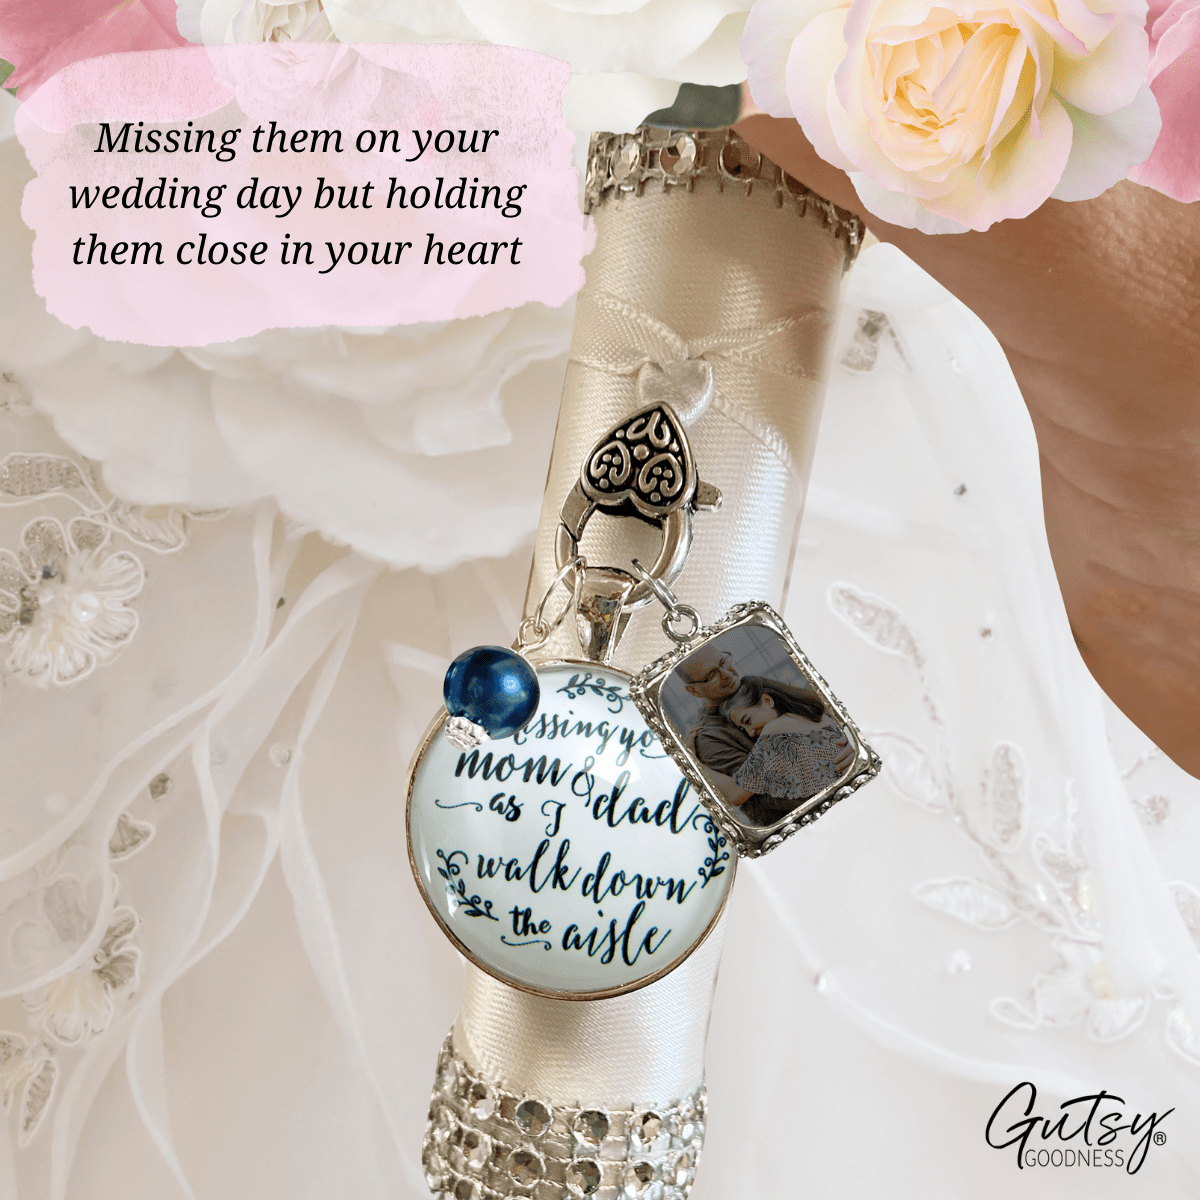 Bouquet Charm Mom Dad Of Bride Remember White Memory Parents Photo Frame Silver Blue Bead - Gutsy Goodness;Bouquet Charm Mom Dad Of Bride Remember White Memory Parents Photo Frame Silver Blue Bead - Gutsy Goodness Handmade Jewelry Gifts